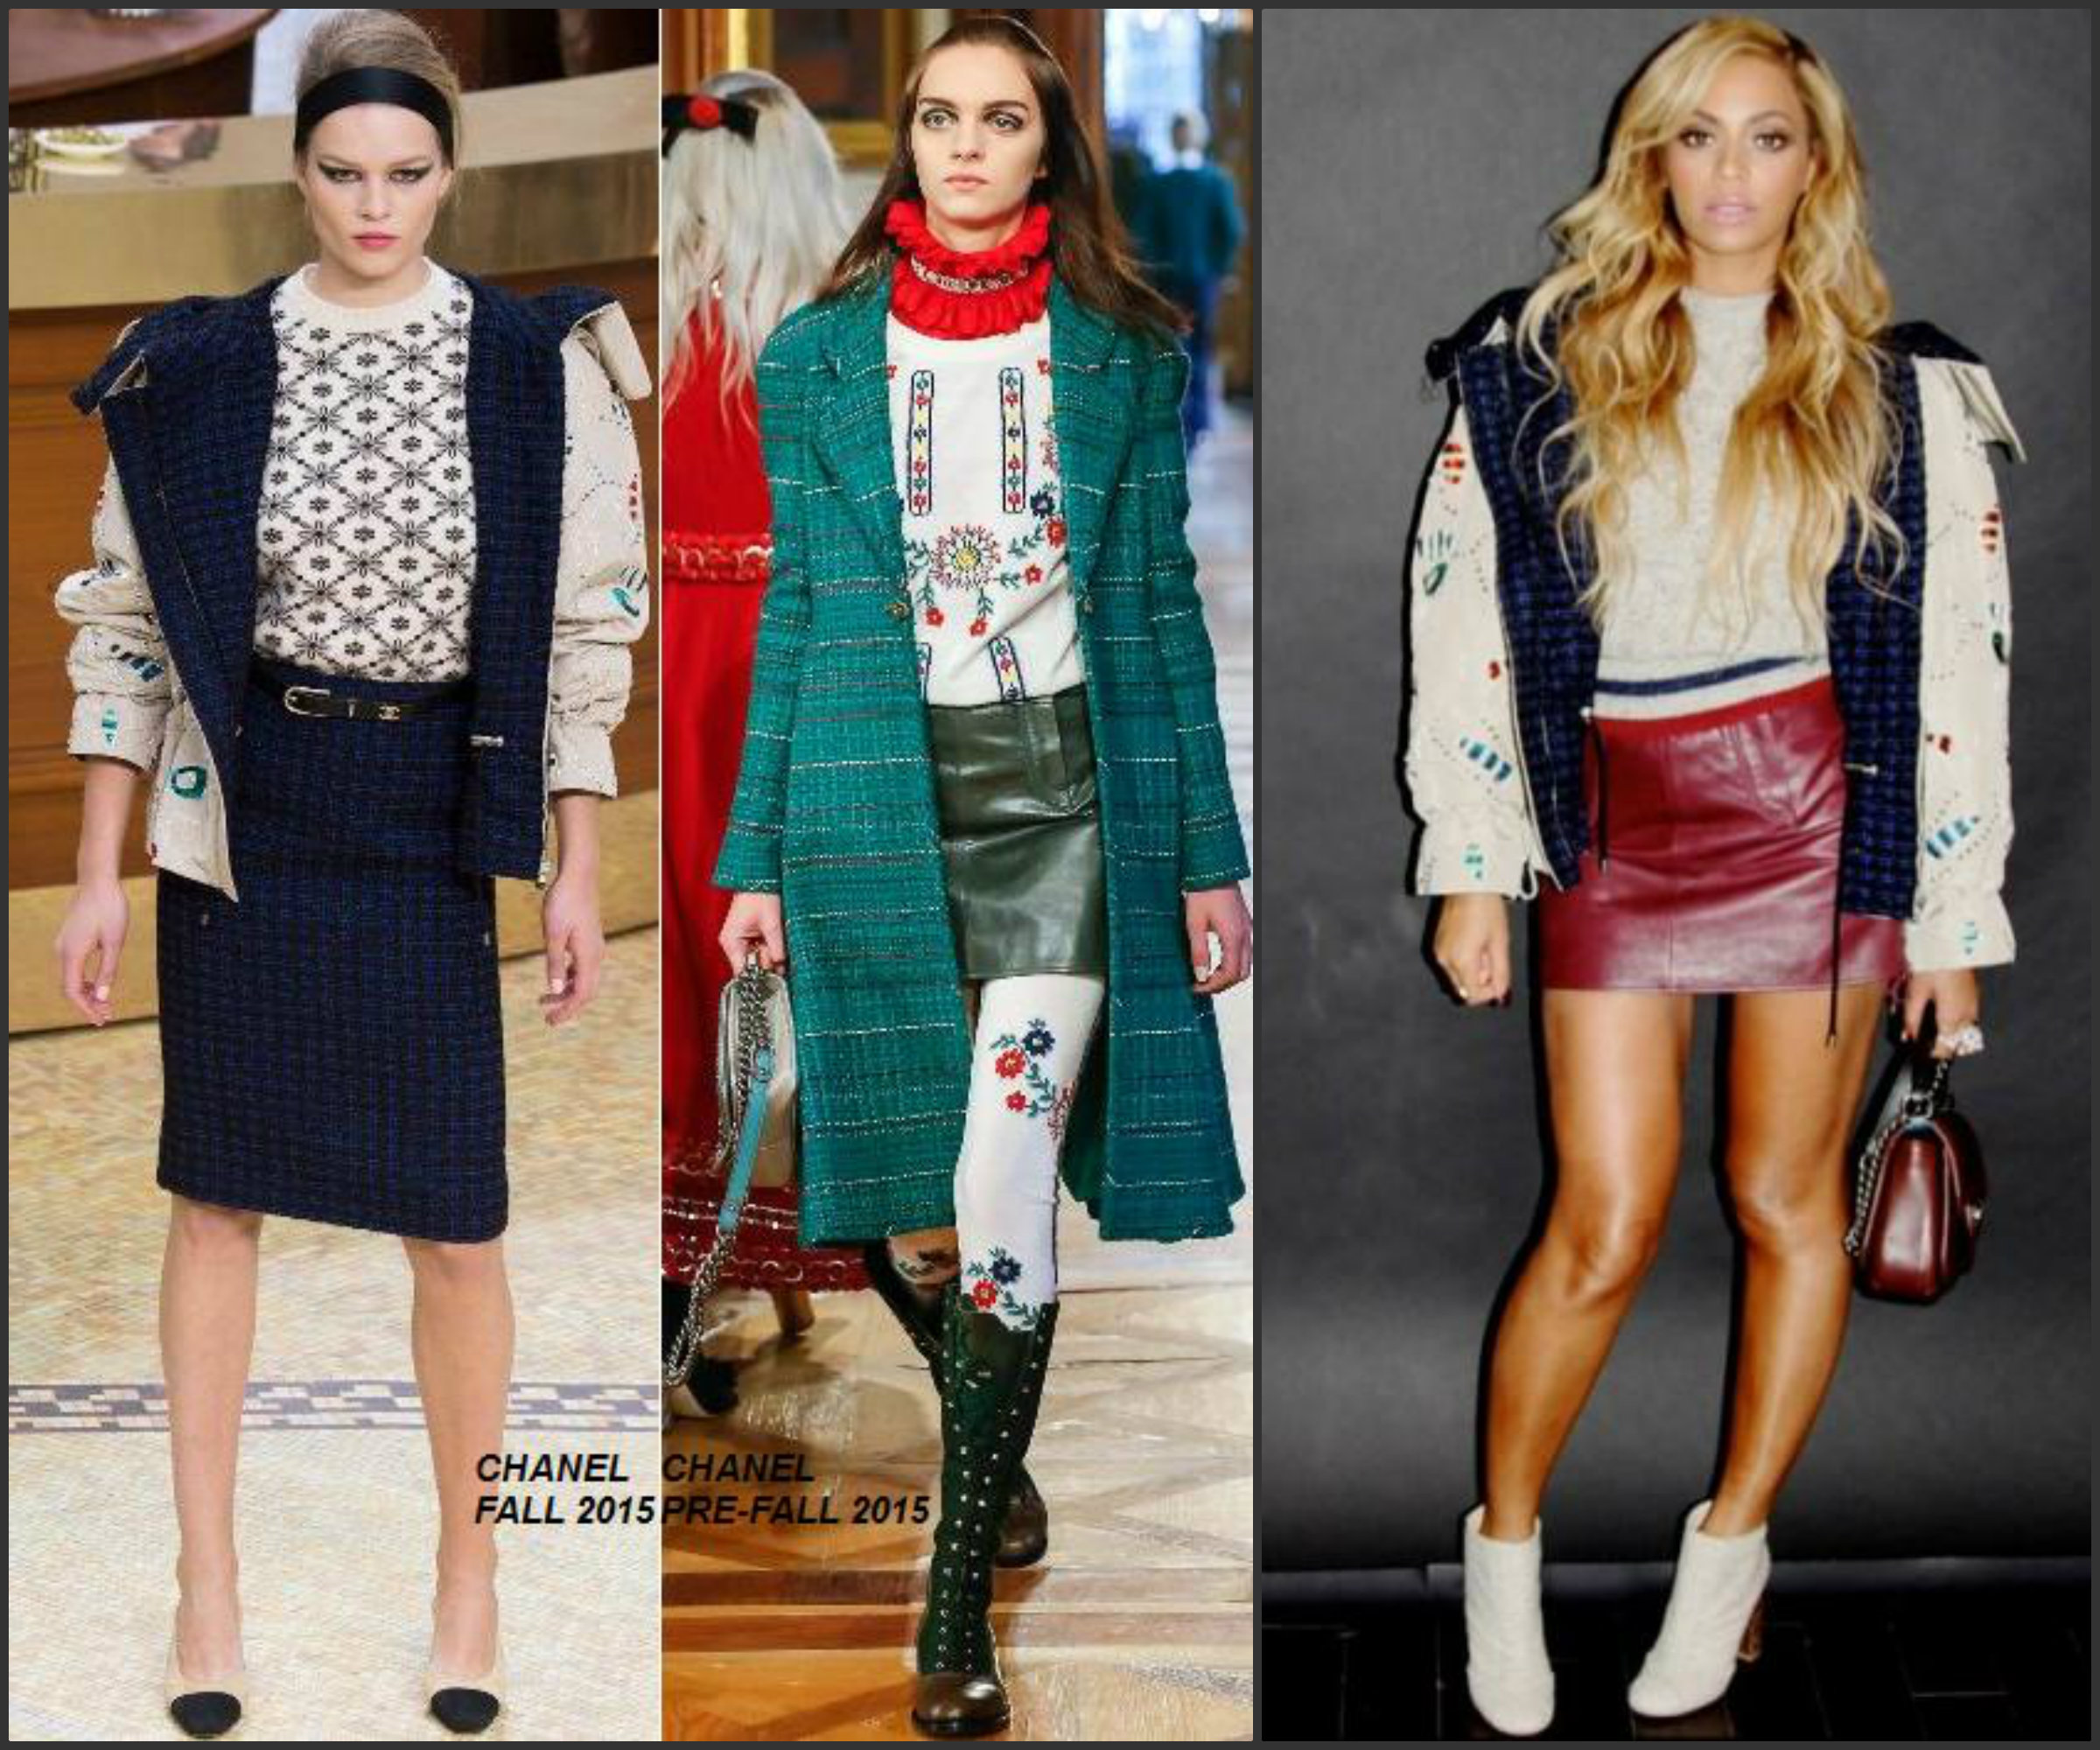 Beyonce in Chanel at the CHANEL Paris-Salzburg 2014/15 Metiers d'Art  Collection show